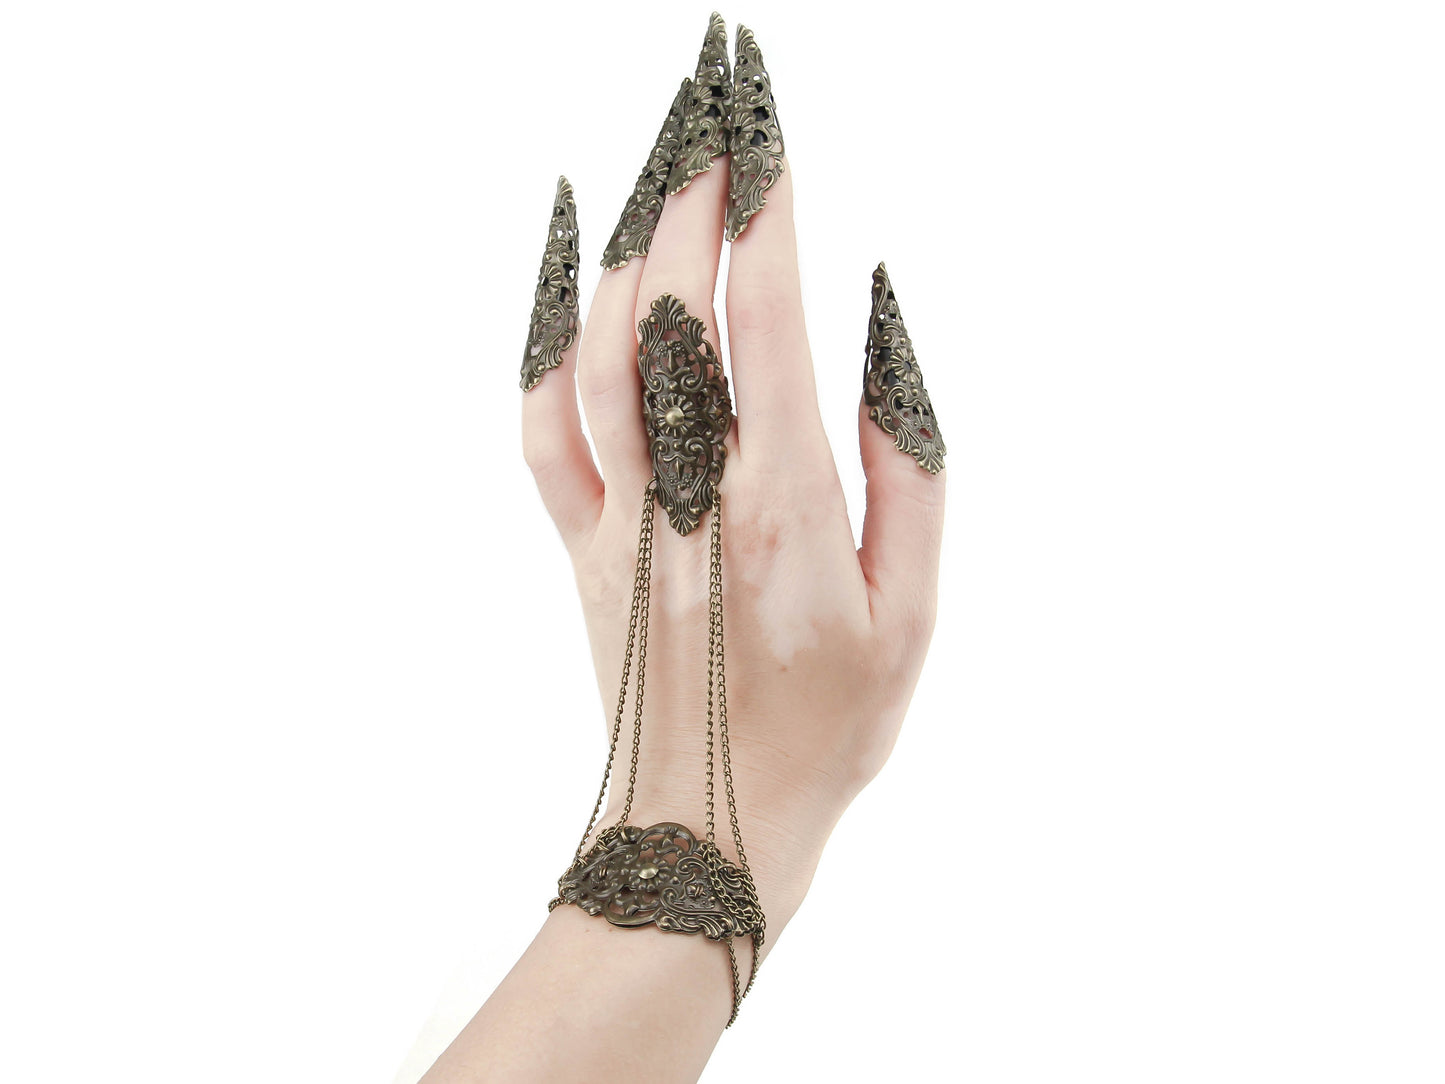 This bronze hand chain is truly stunning, featuring a gothic-inspired design that is perfect for those with a bold fashion sense. Adorned with bronze sharp nail claws, it captures the essence of goth fashion. The intricate filigree metalwork on the back of the hand adds an elegant touch, while chains connect the bracelet to the middle finger ring. Set against a white background, this meticulously crafted creation exudes a refined and mysterious charm.